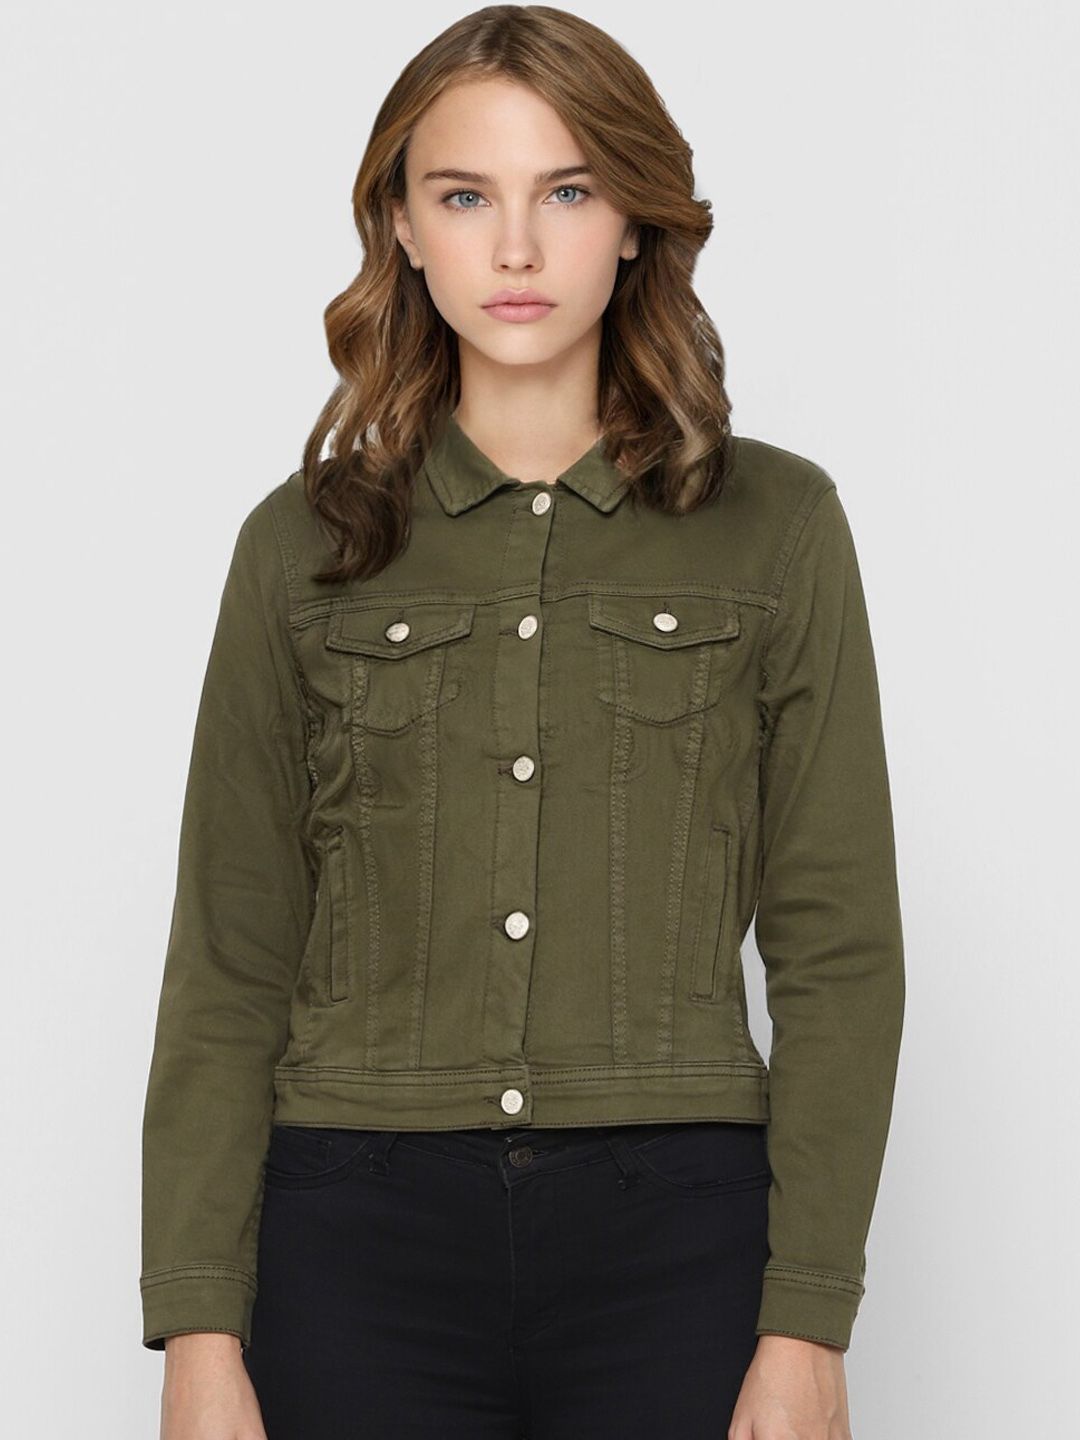 ONLY Women Olive Solid Tailored Jacket Price in India